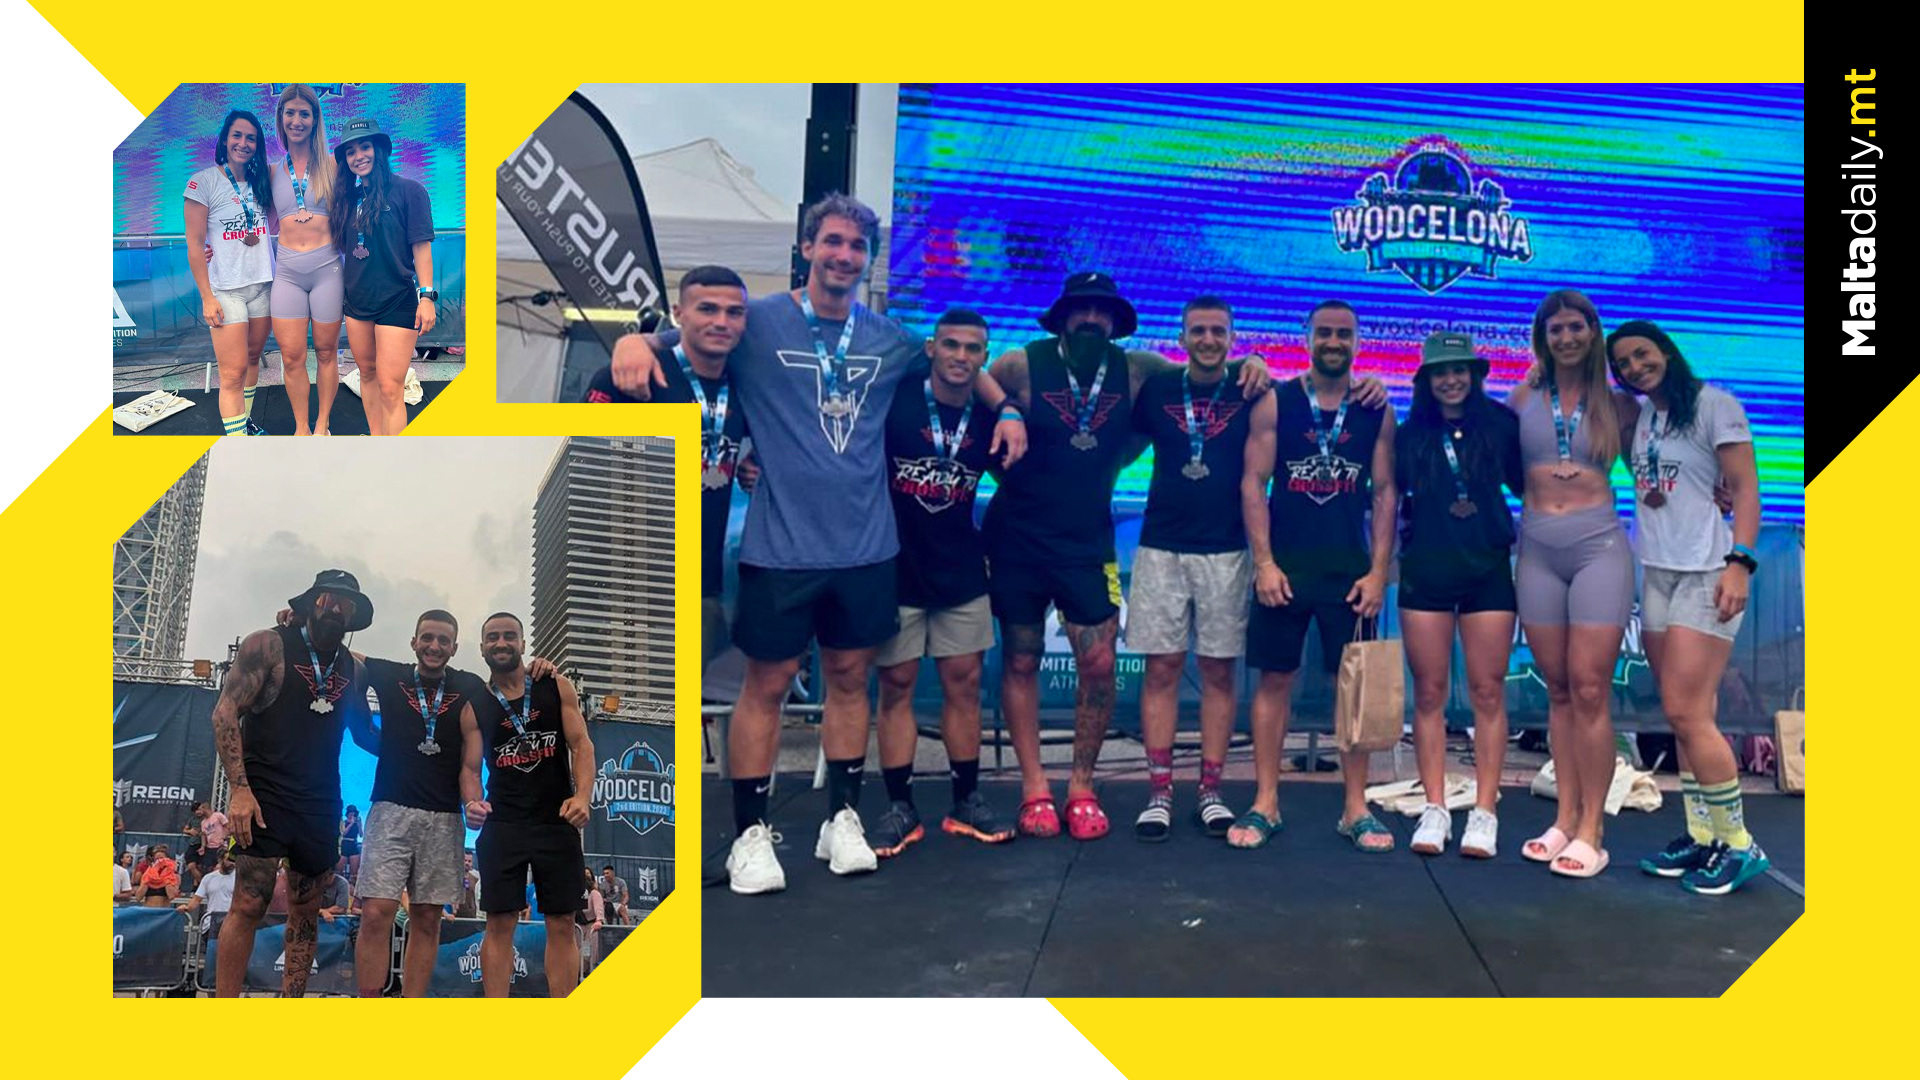 3 Podium Finishes For Maltese Crossfit Teams At Wodcelona